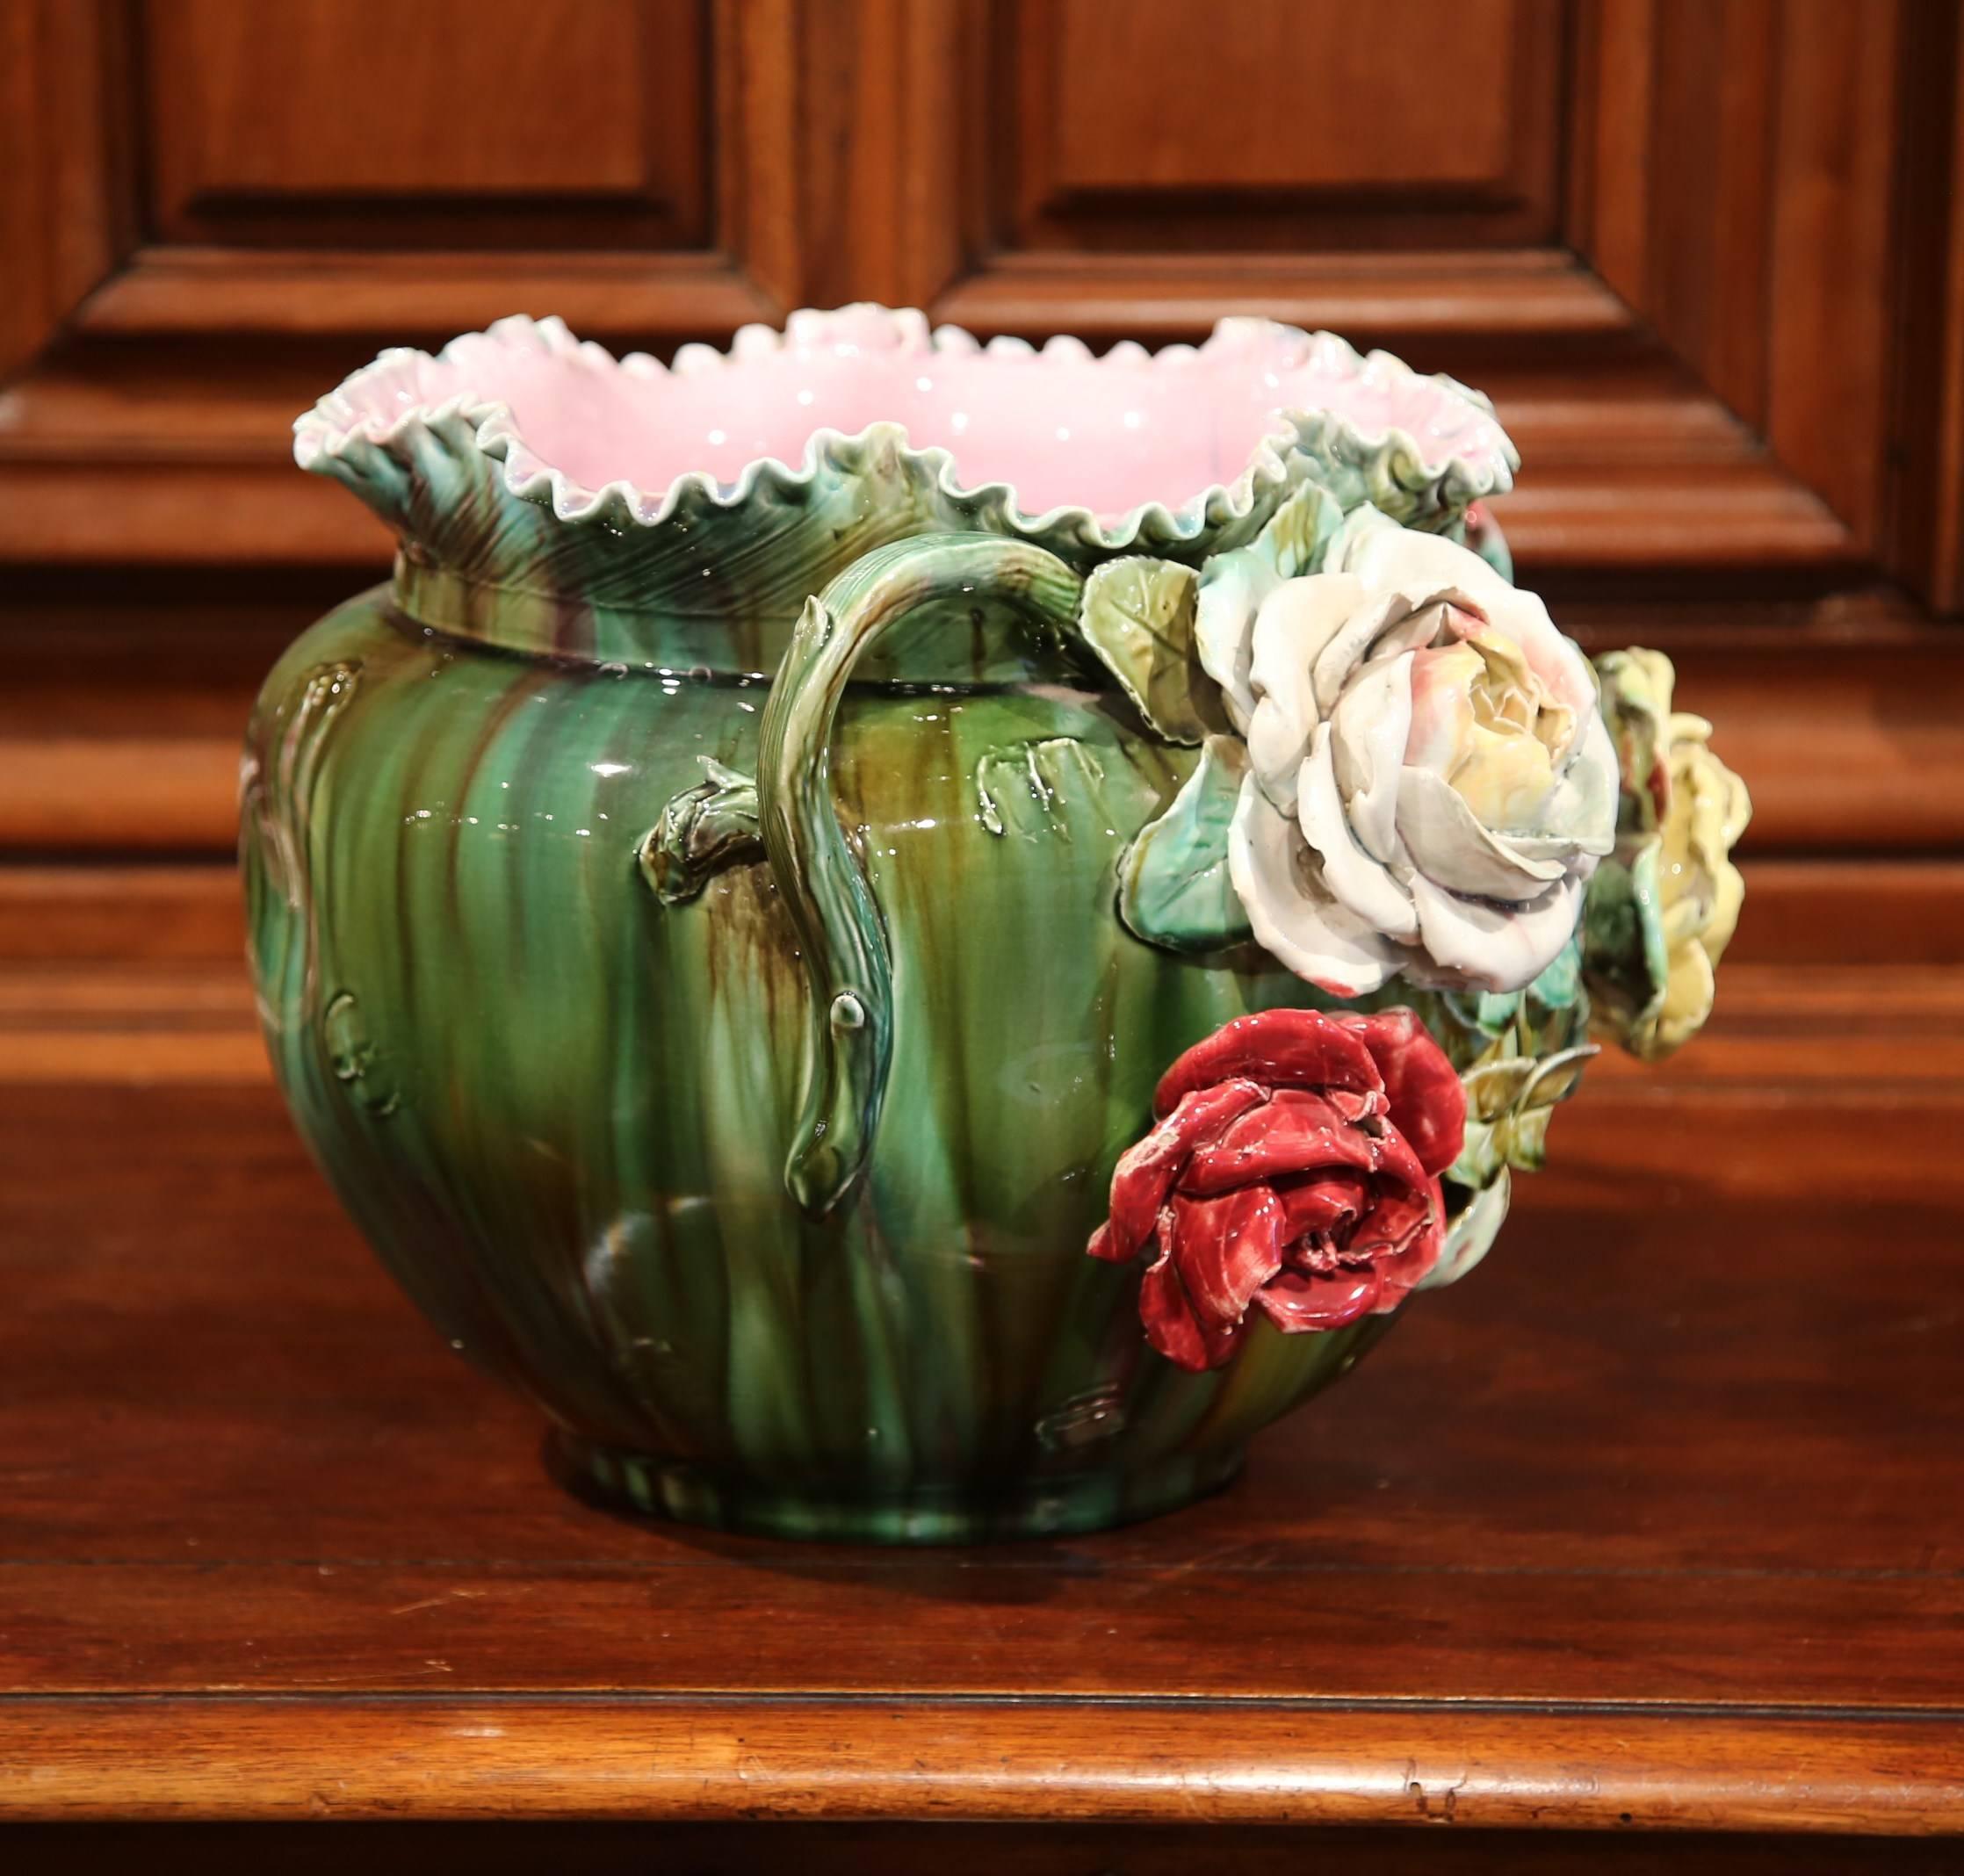 Hand-Crafted 19th Century French Ceramic Barbotine Cachepot with Floral and Leaf Decor